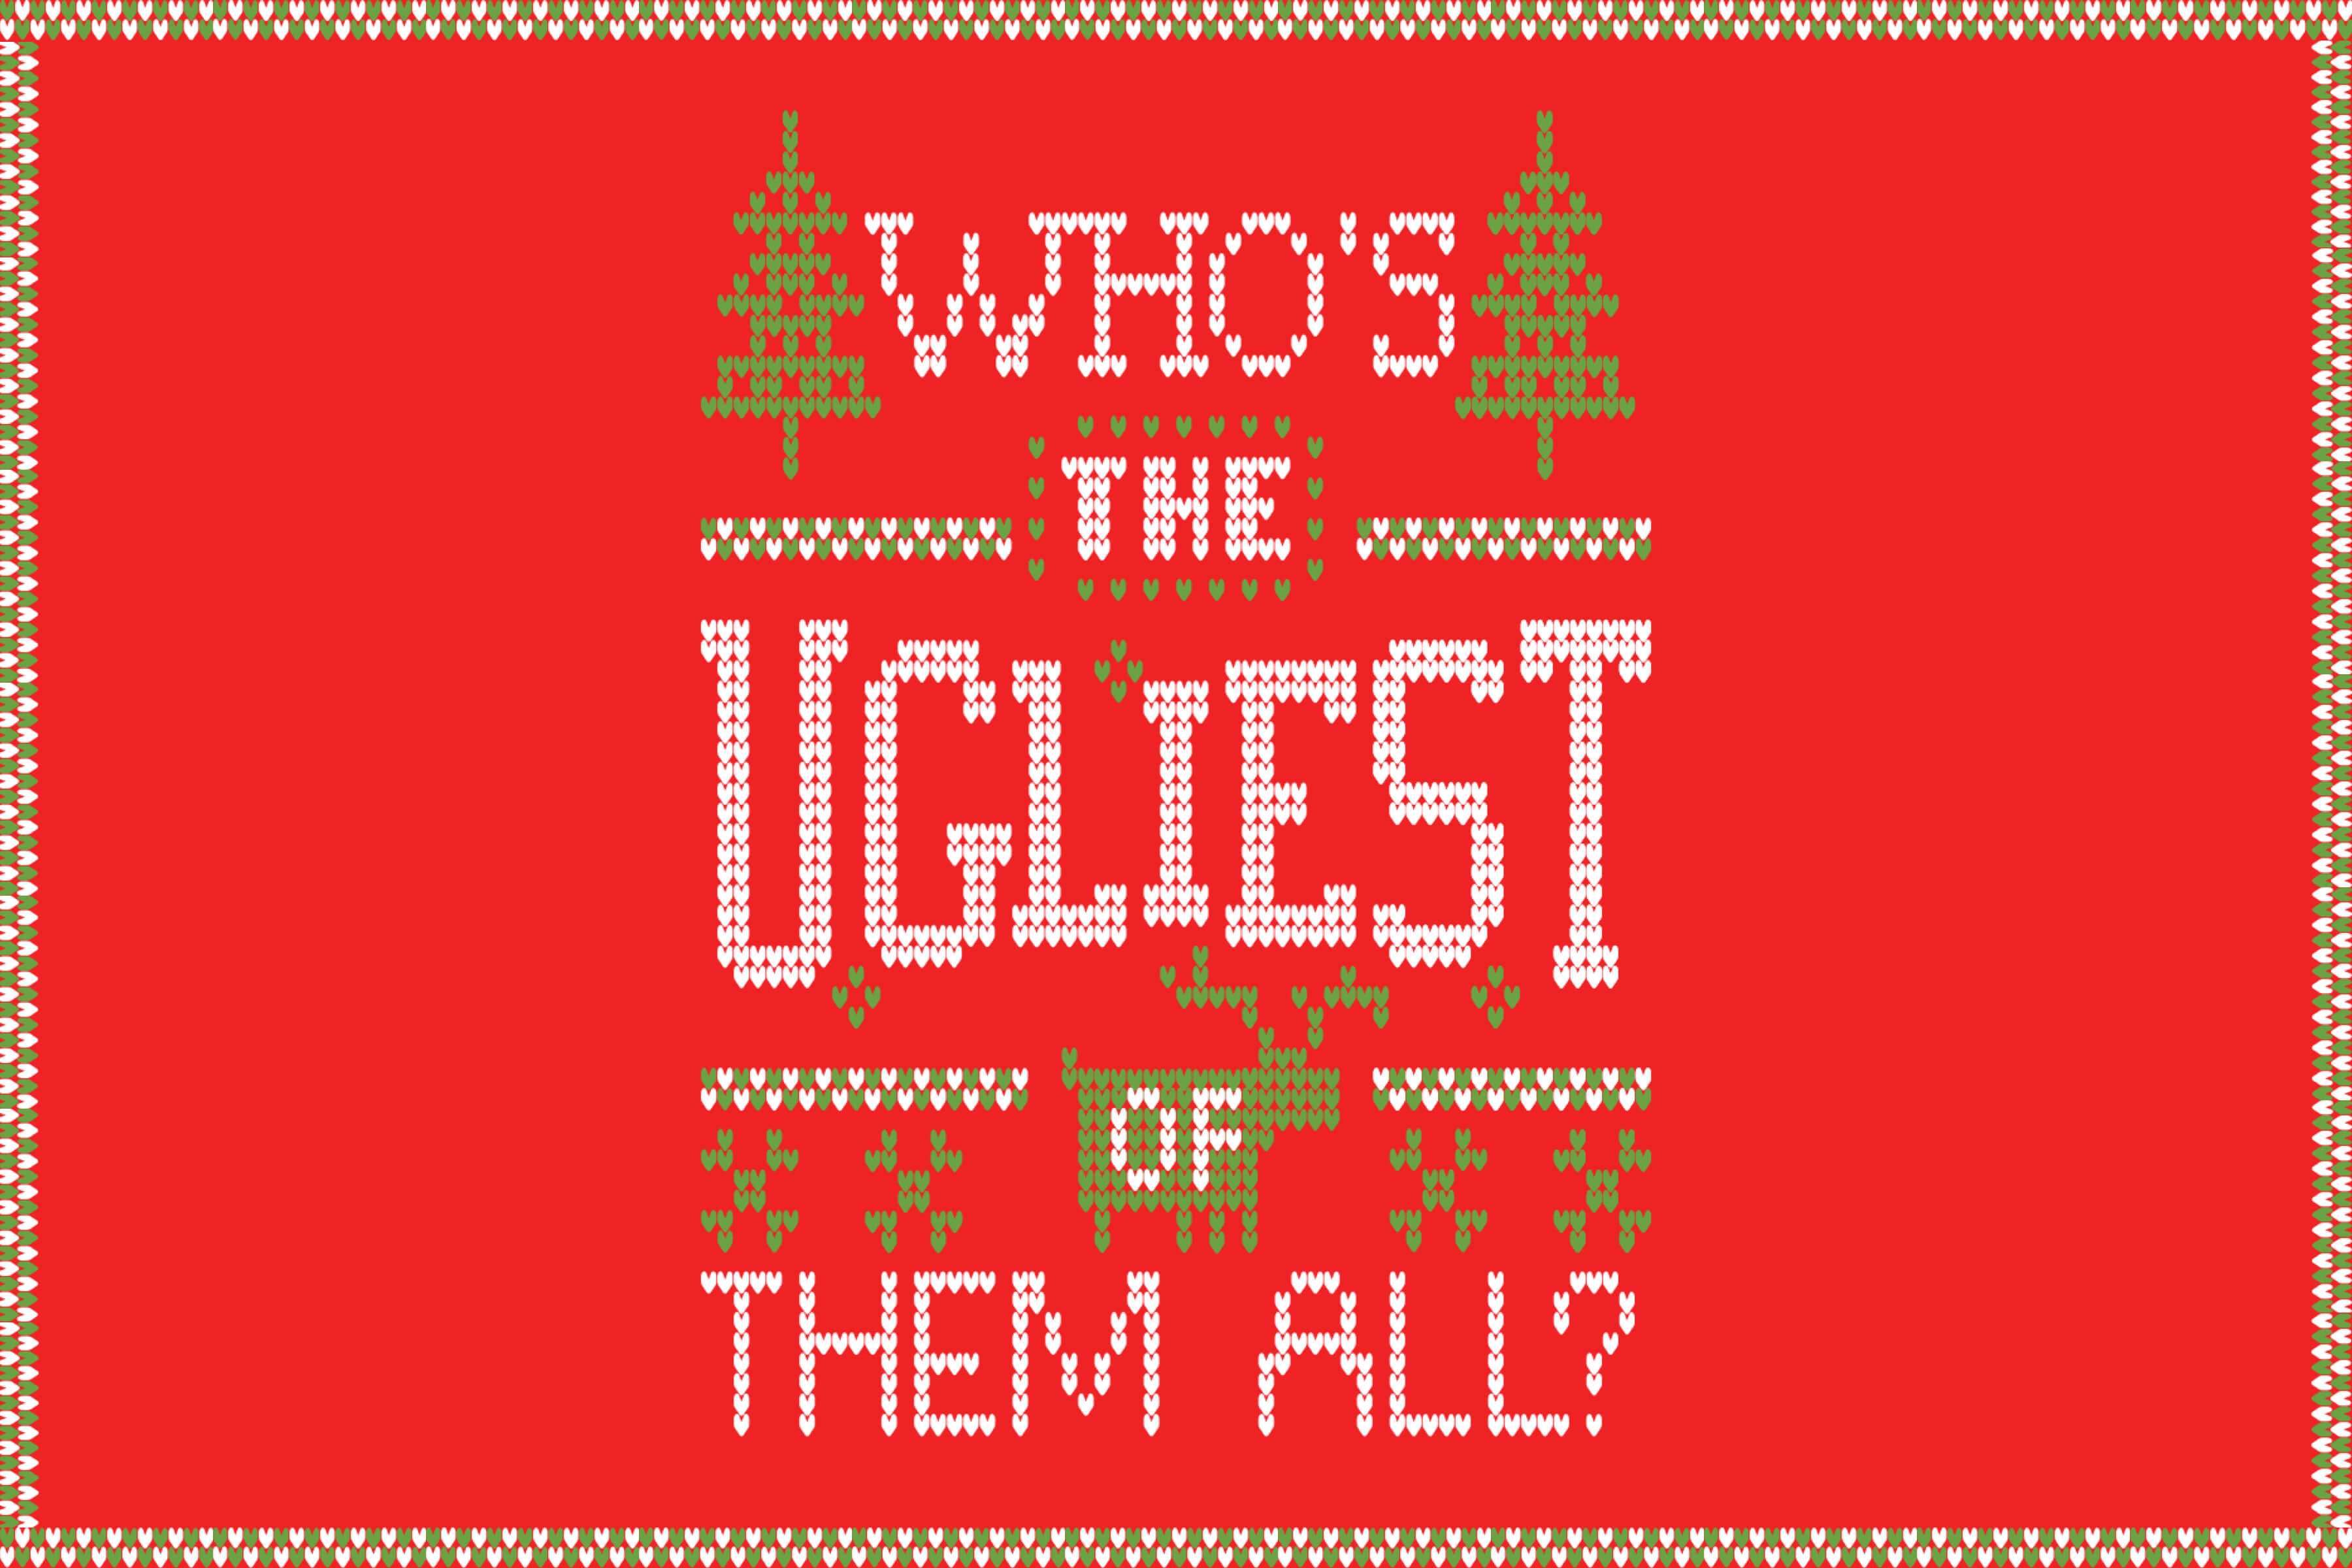 Ugly Holiday Sweaters for When You're Feeling a Little Extra [Gift Guide] -   Blog